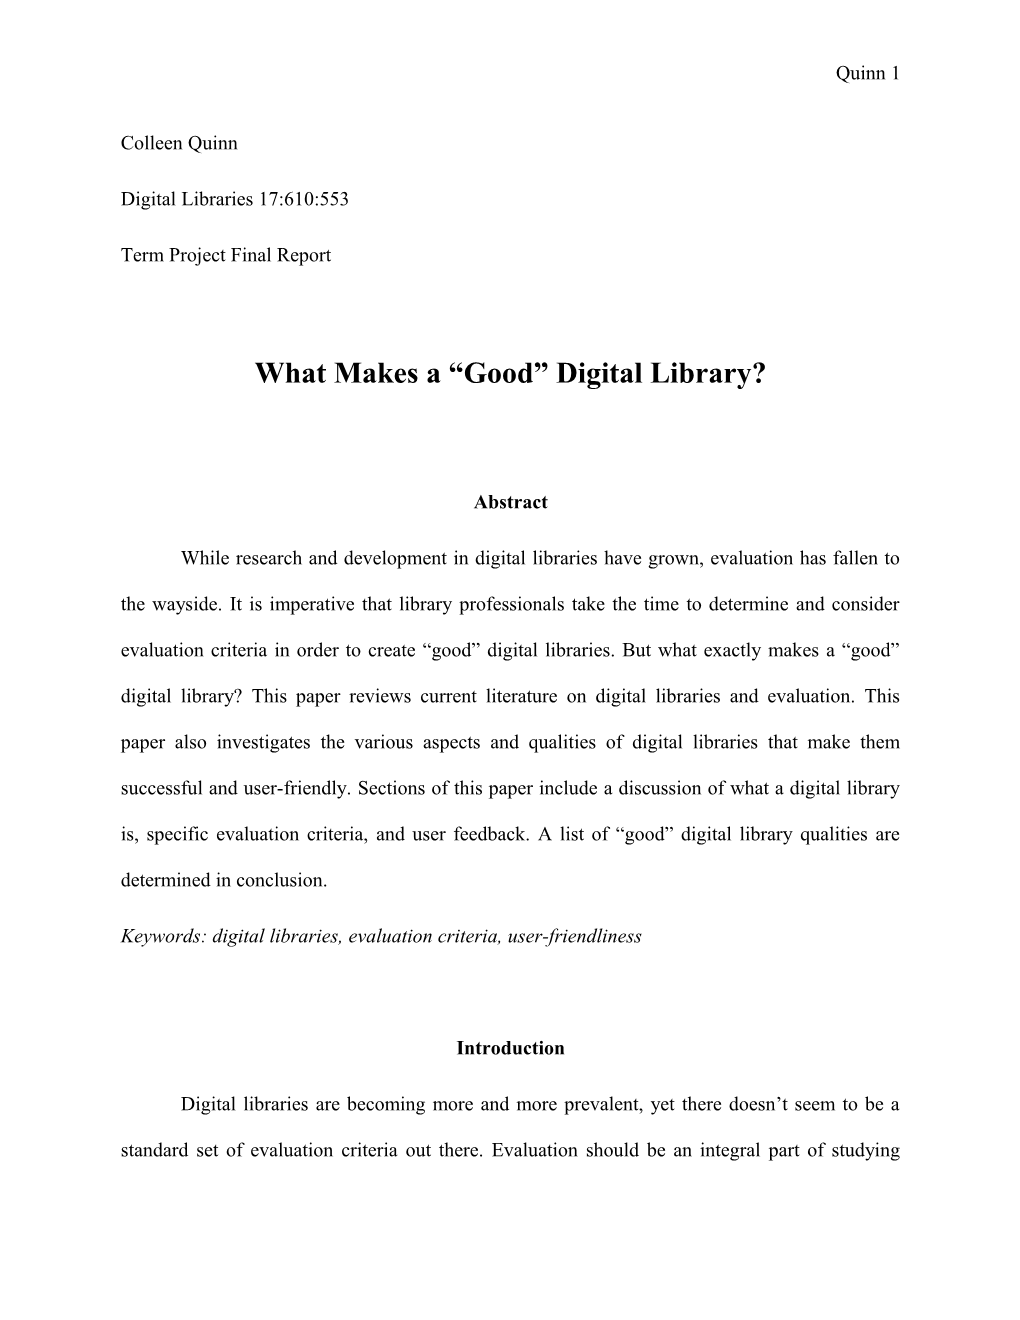 What Makes a Good Digital Library?